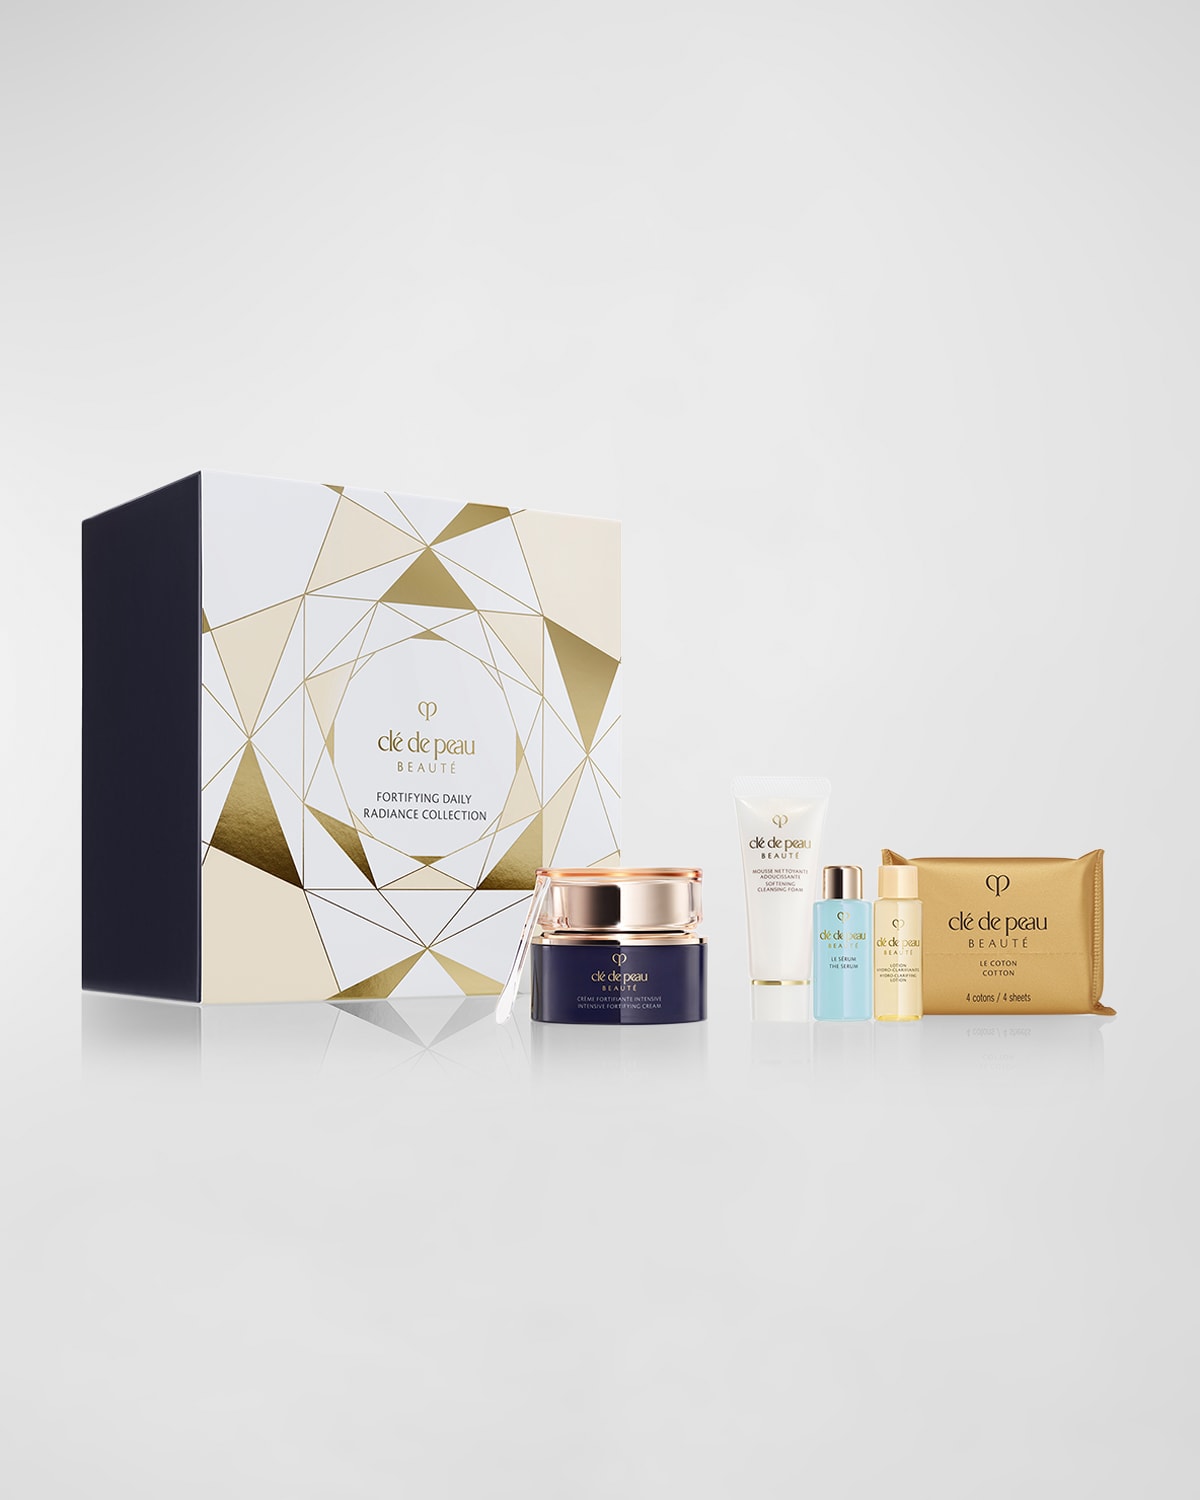 Limited Edition Fortifying Daily Radiance Collection ($225 Value)